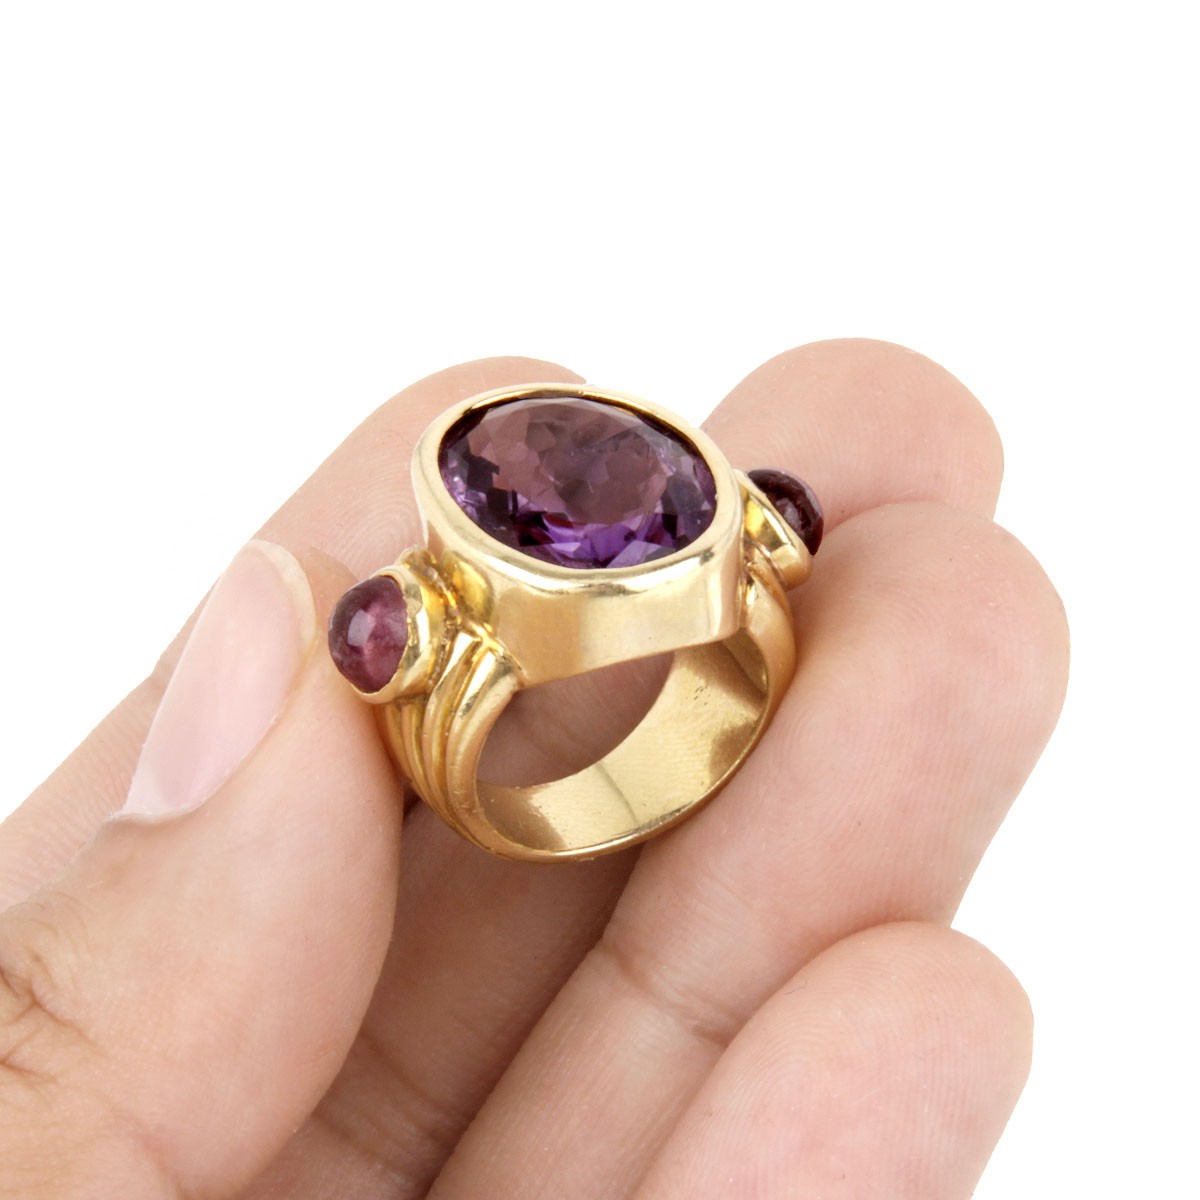 Vintage Amethyst and 18K Ring - Image 7 of 7